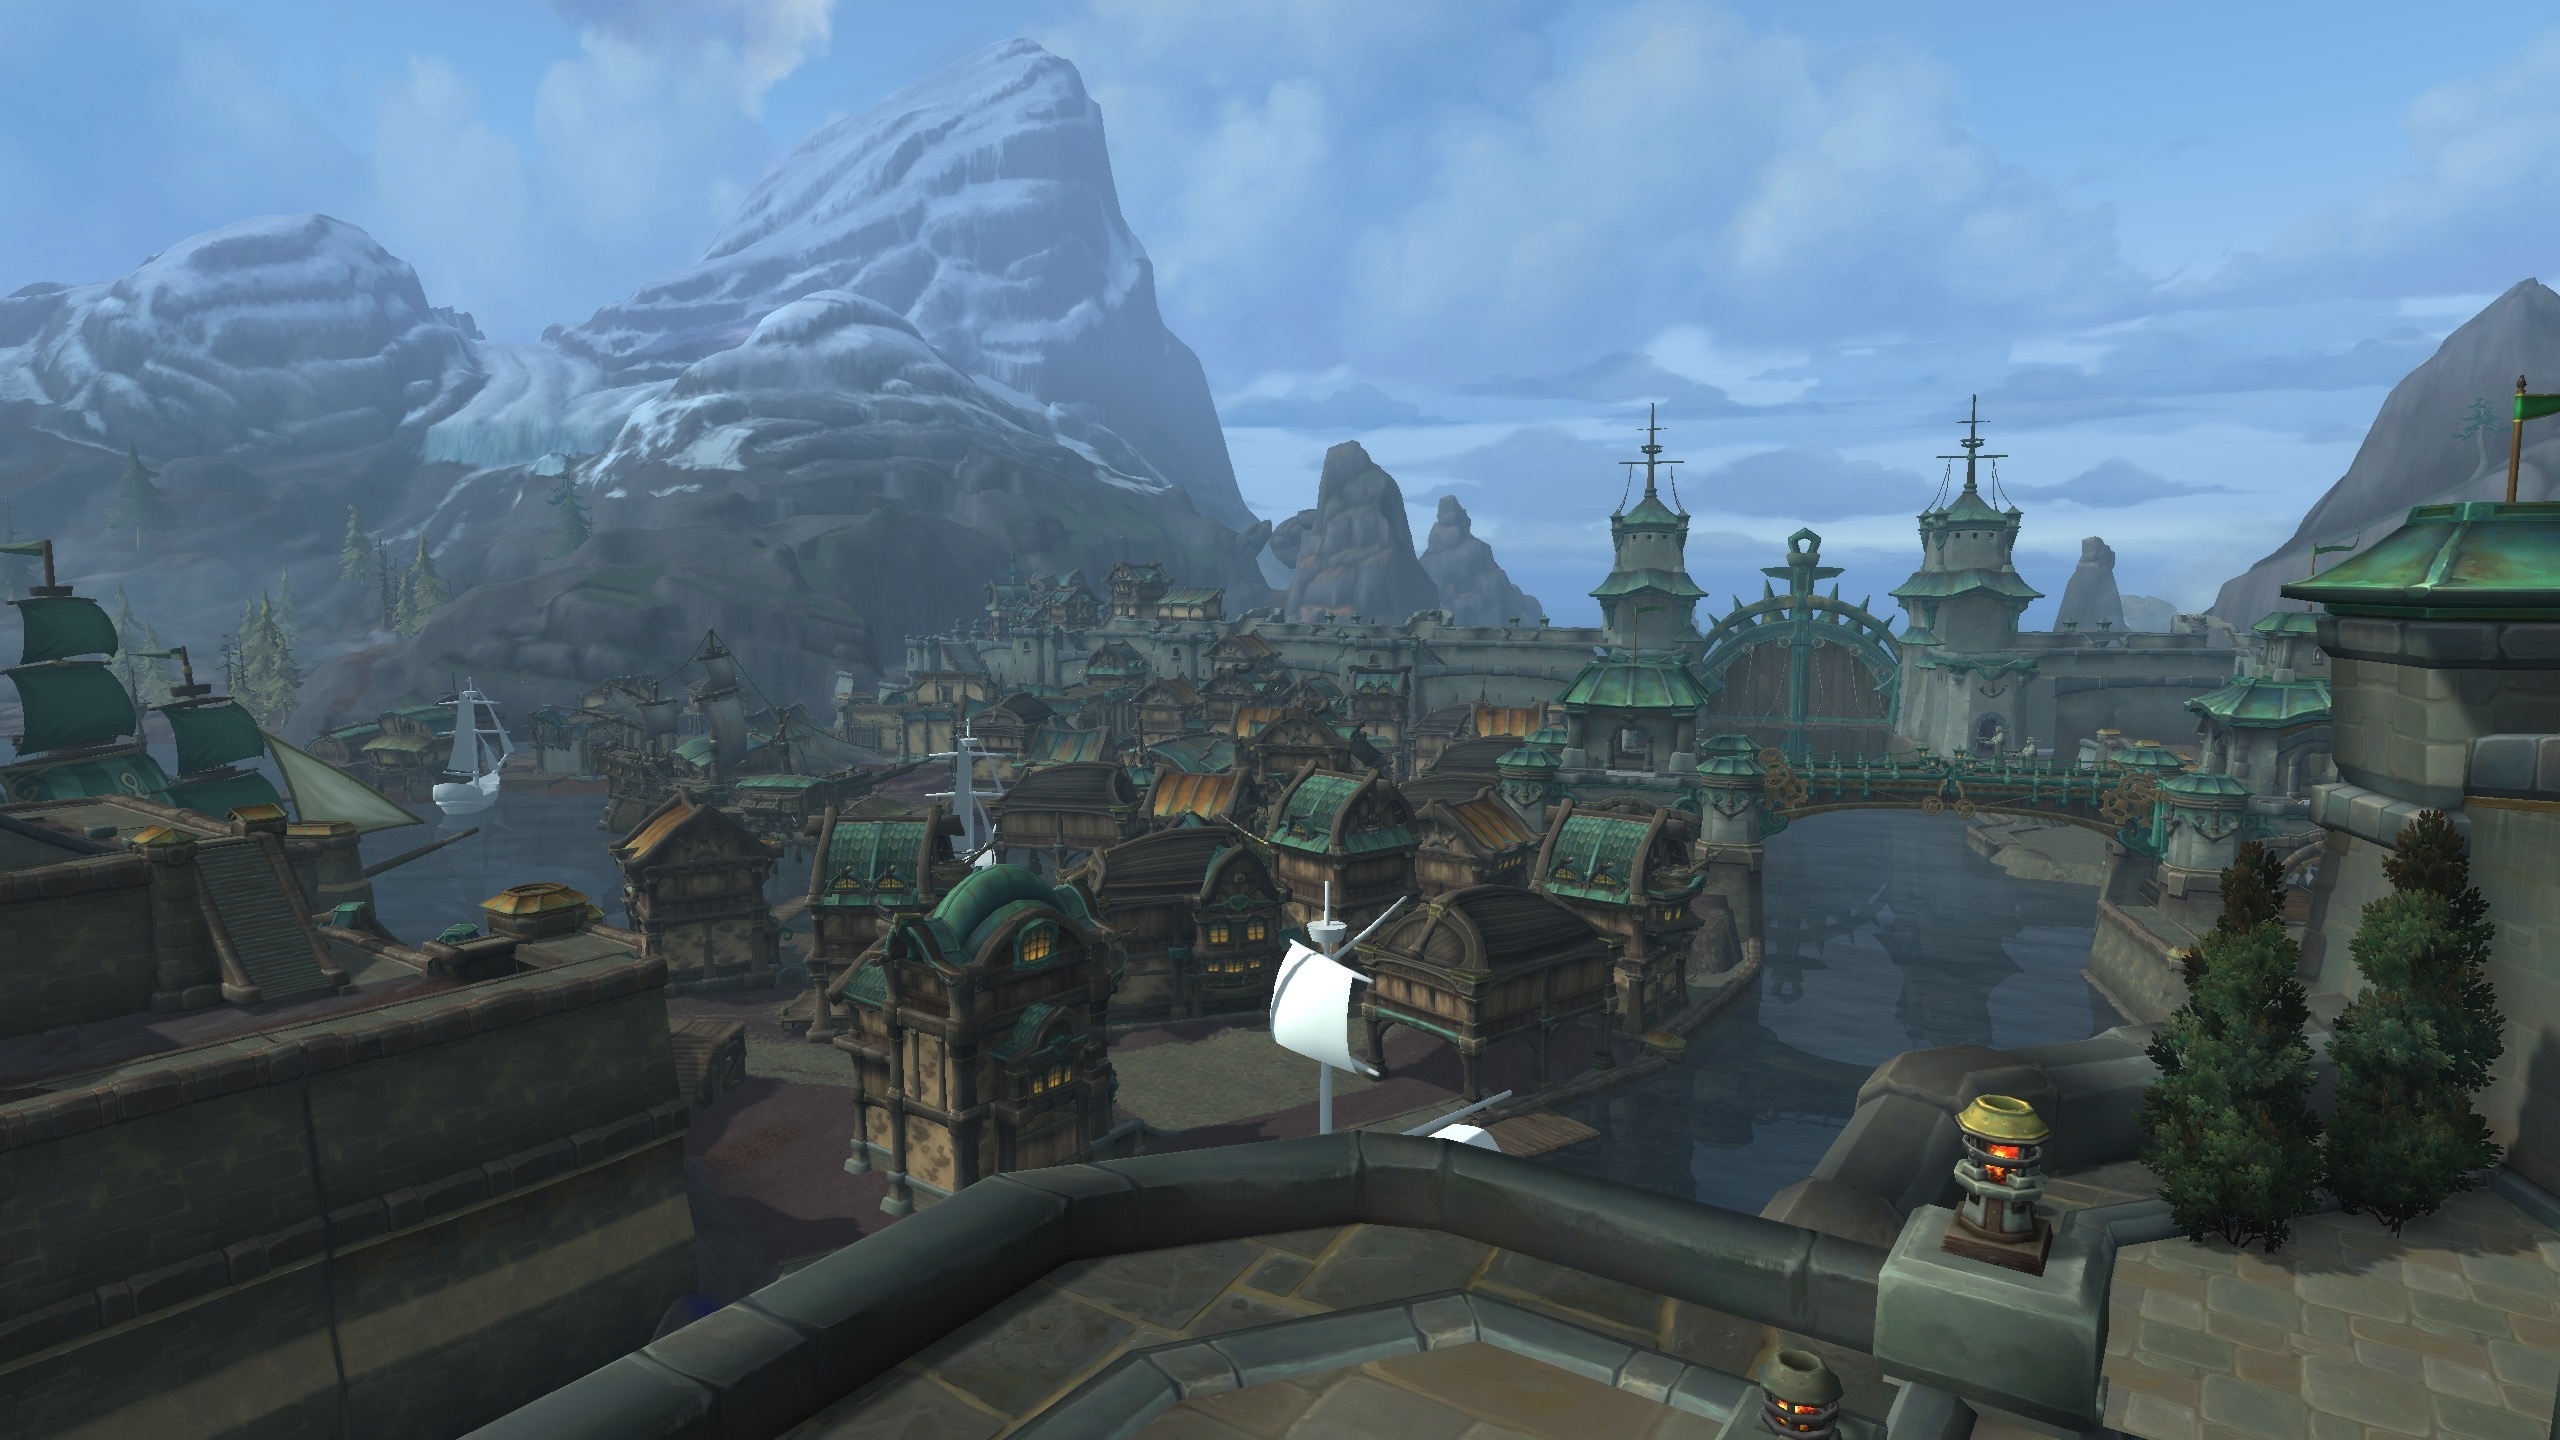 Early Look at Boralus, the Alliance Hub in Battle for Azeroth - Wowhead News2560 x 1440